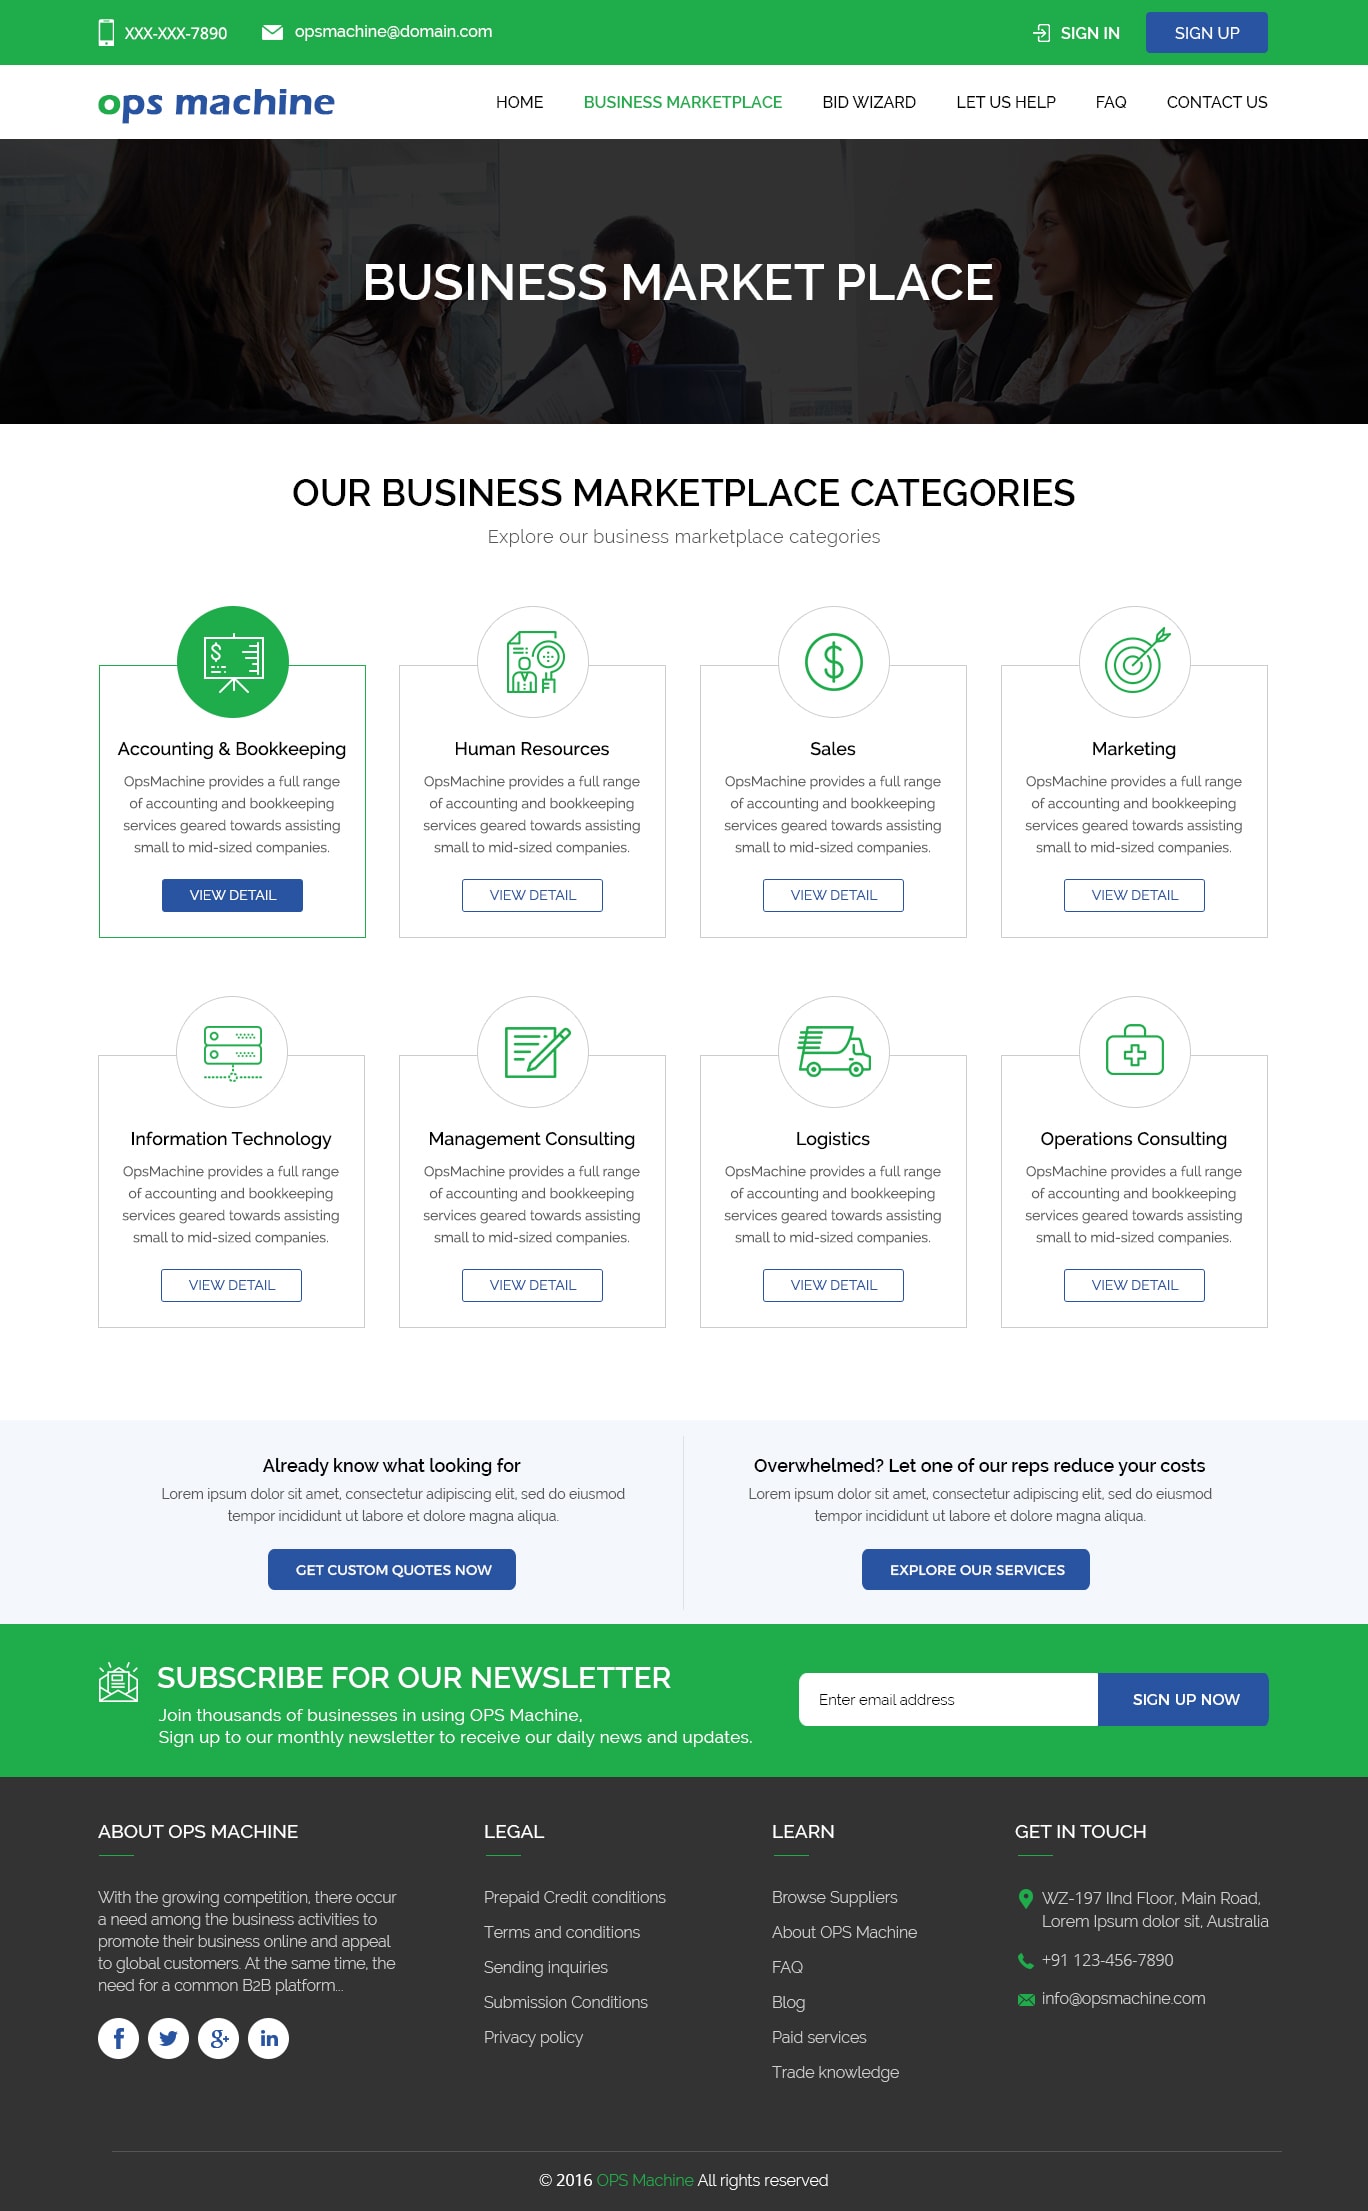 Business Market place page_pic